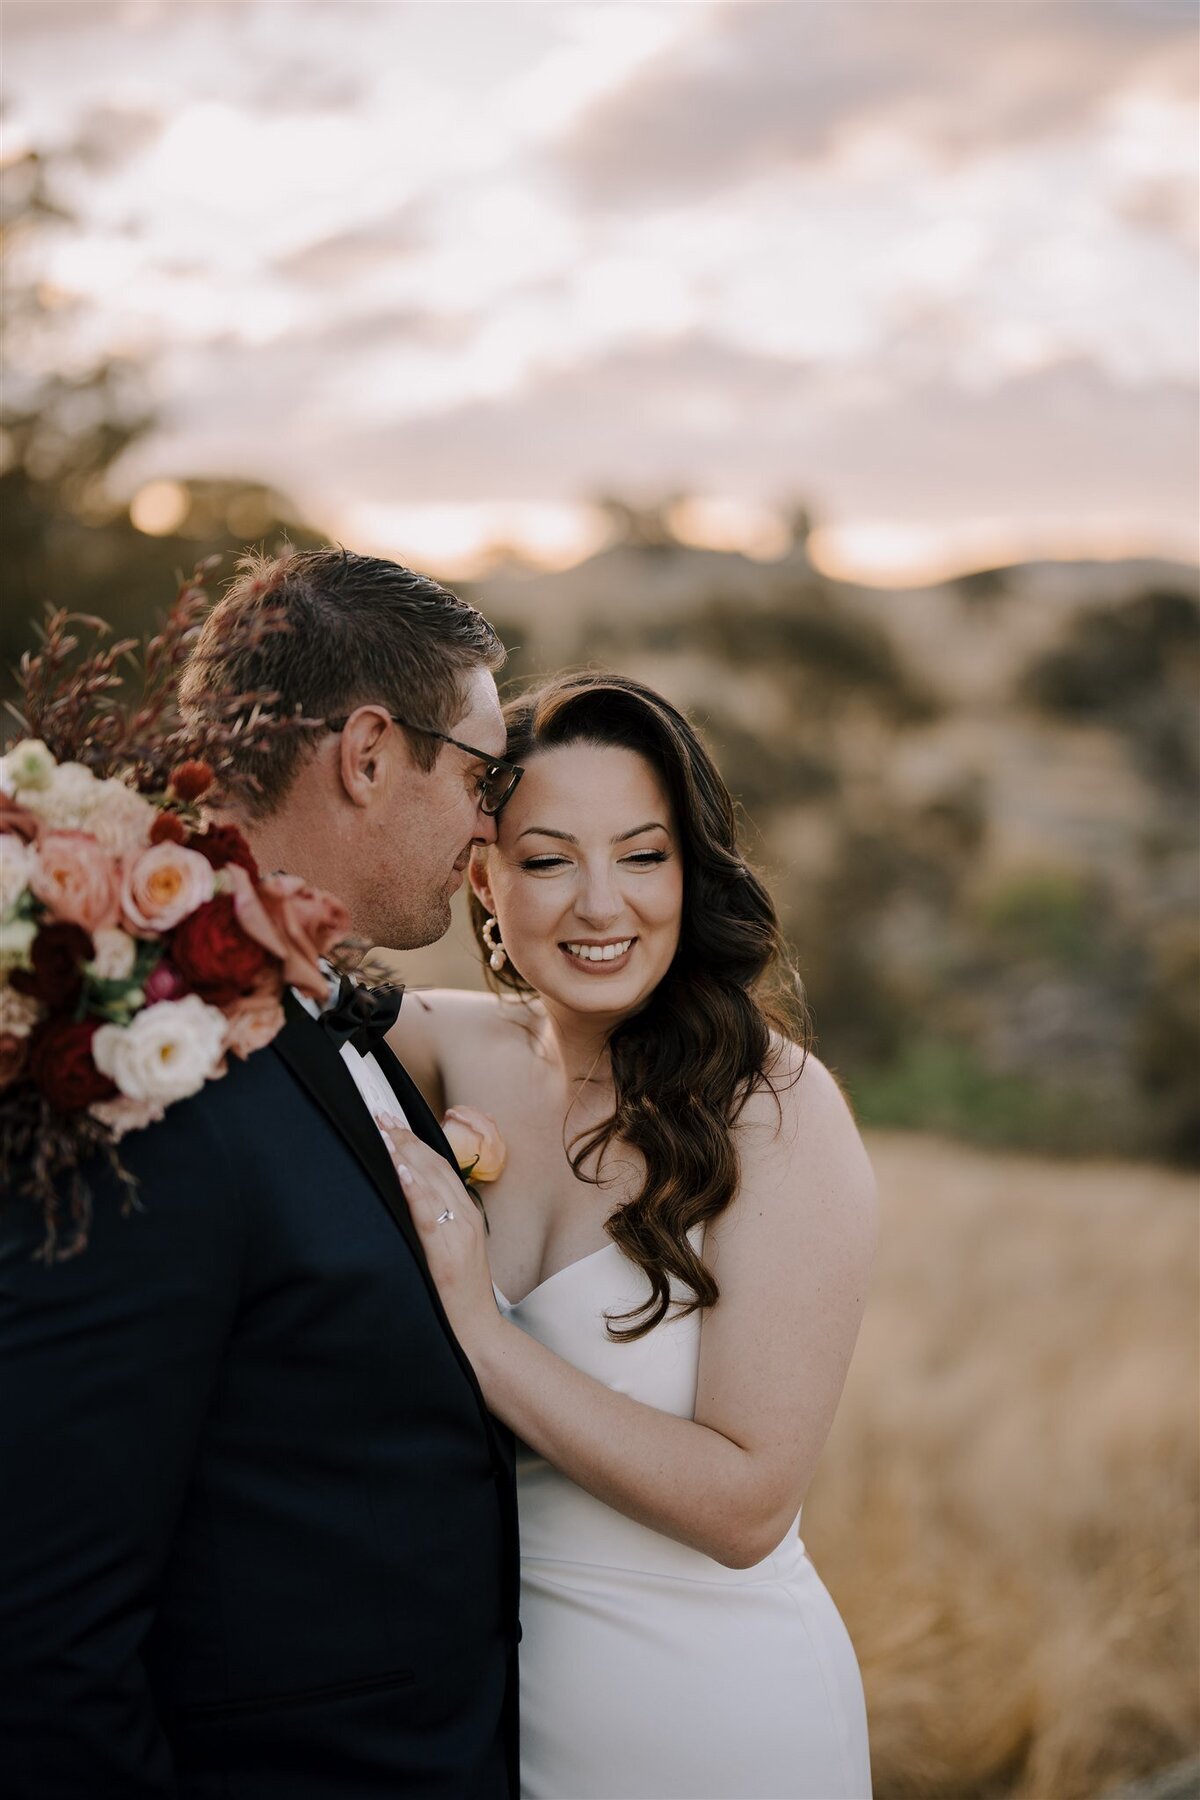 Editorial Wedding Photography Melbourne, capturing couples embracing in the natural beauty of golden hour